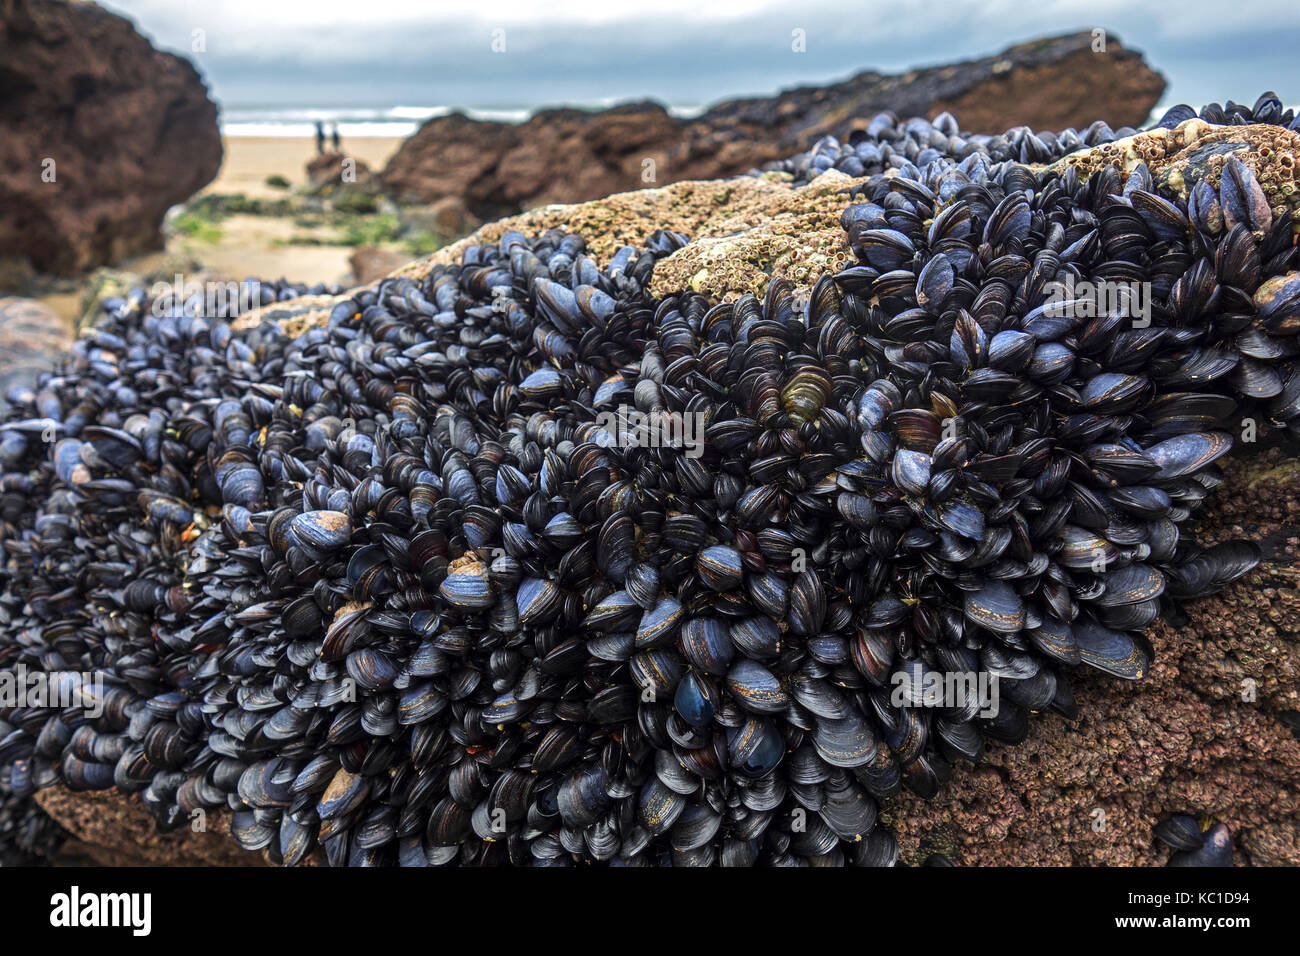 blue or common mussels on rocks at godrevy beach in cornwall, england, britain, uk. Stock Photo